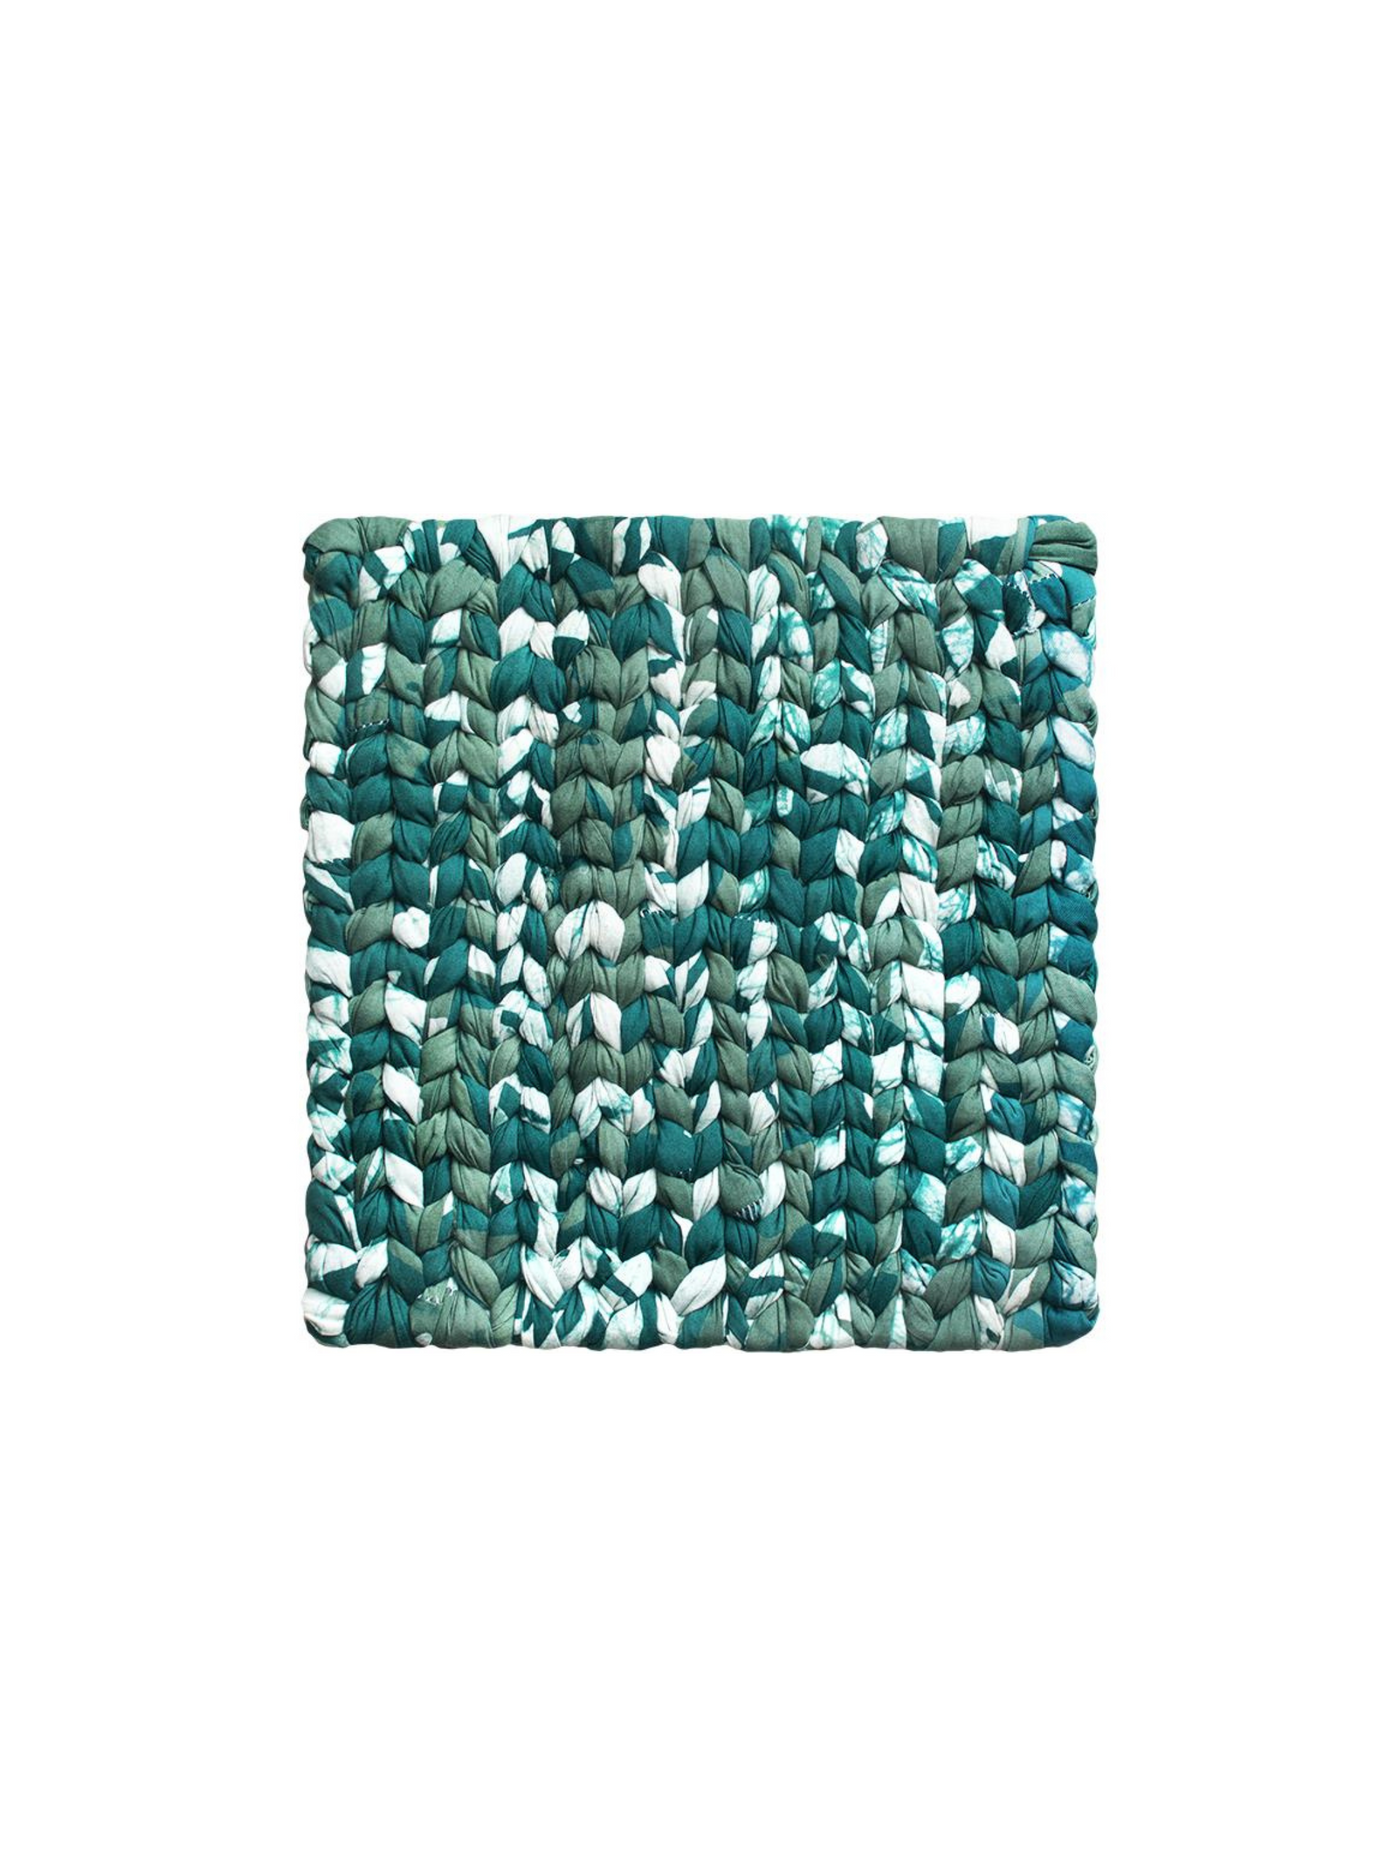 Upcycled Woven Trivet - Four Colors